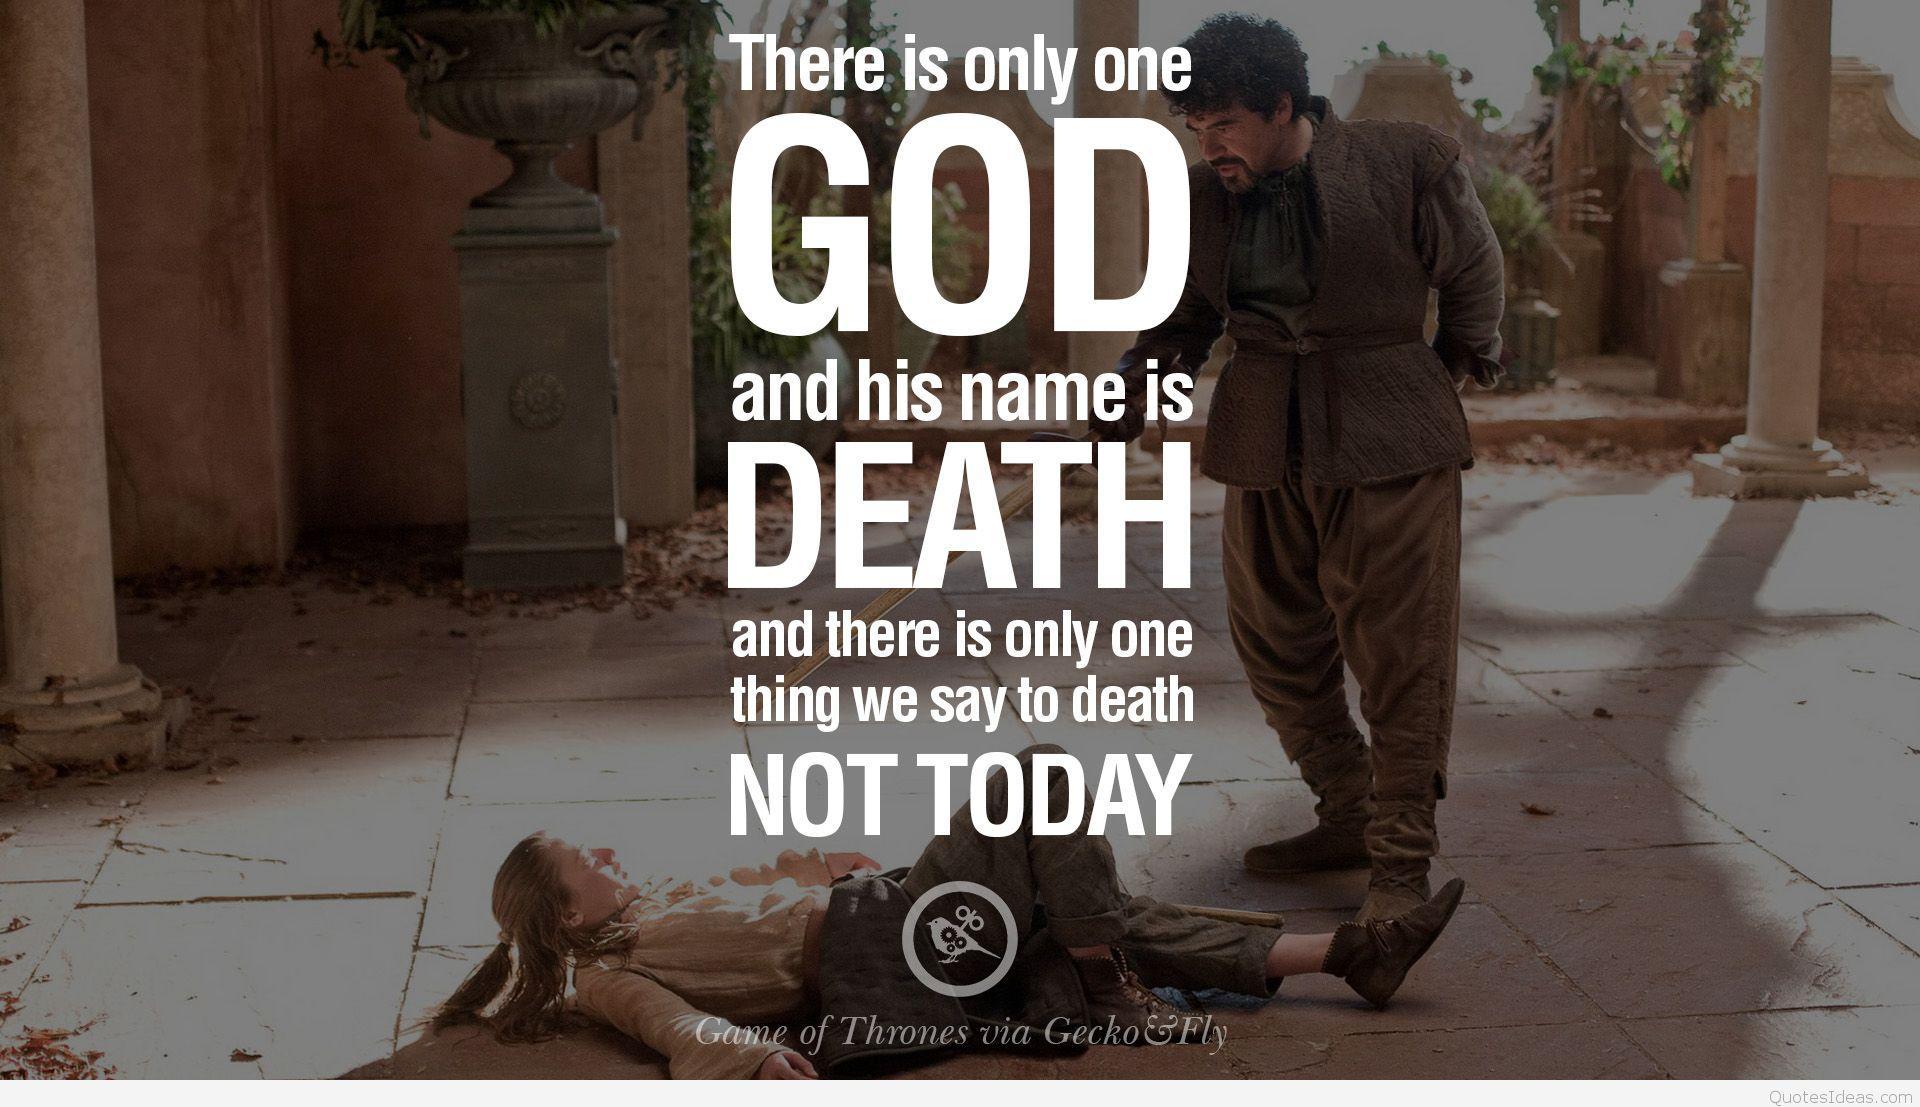 Deaths today. Game of Thrones quotes. Not today Death. What we say to God of Death not today.